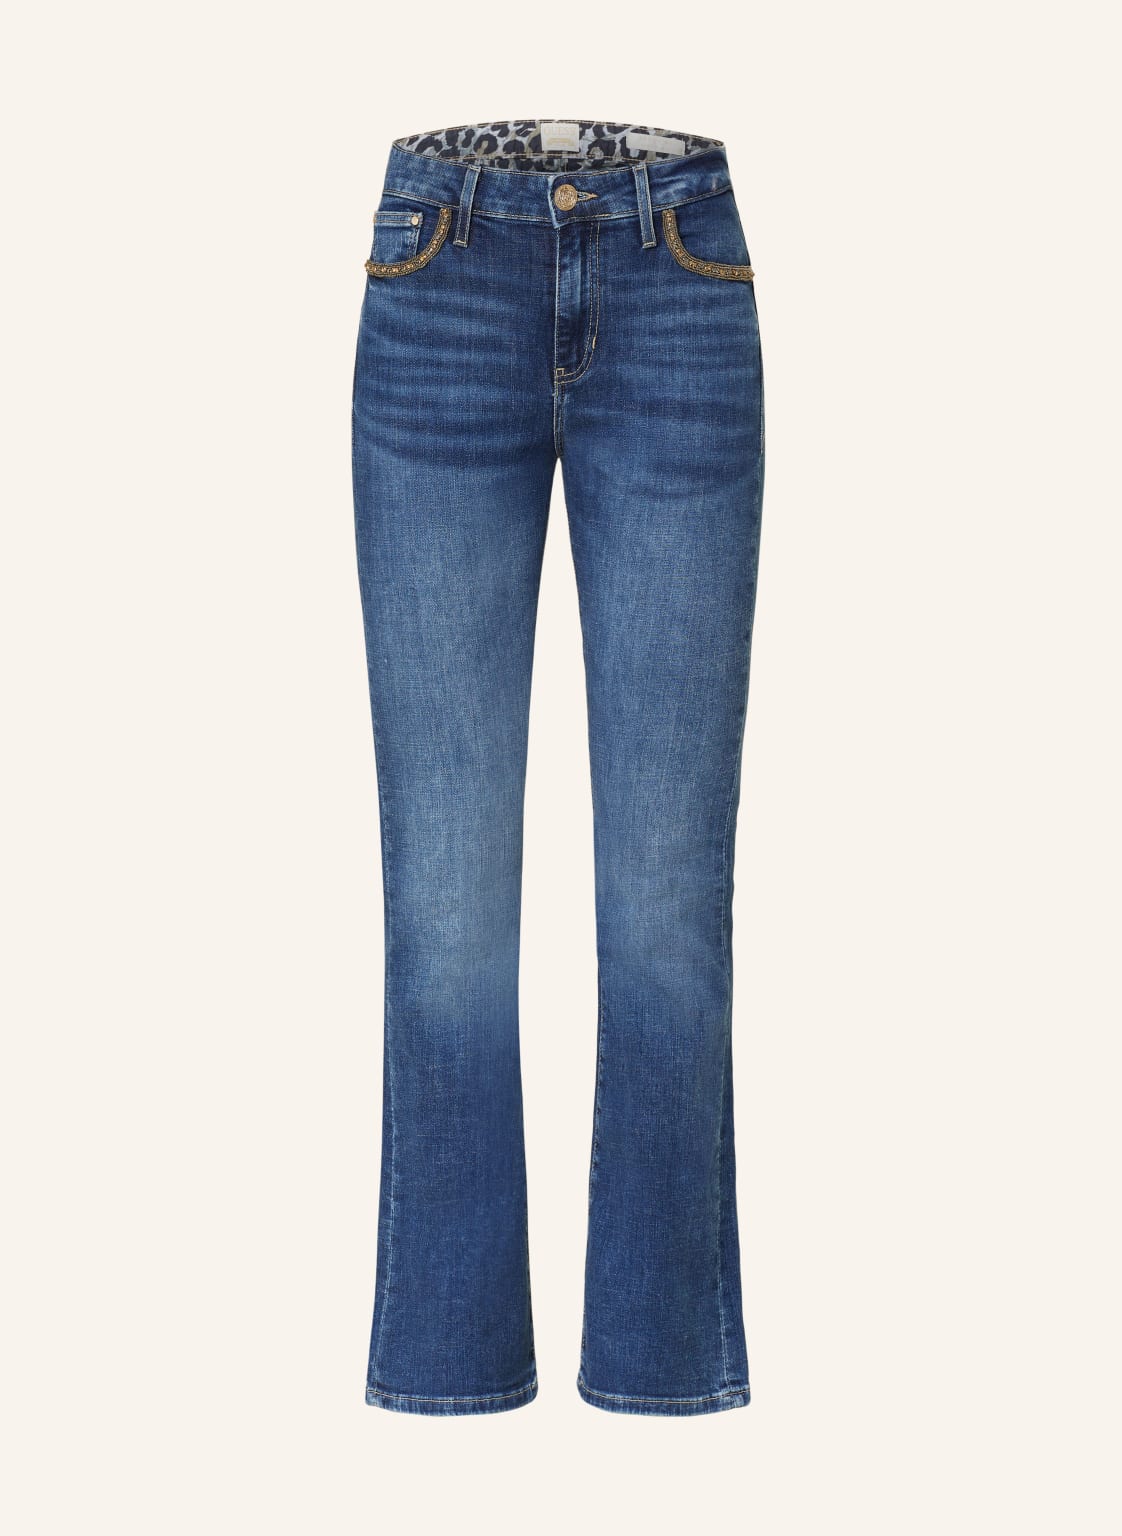 Guess Flared Jeans Sexy Flares blau von Guess